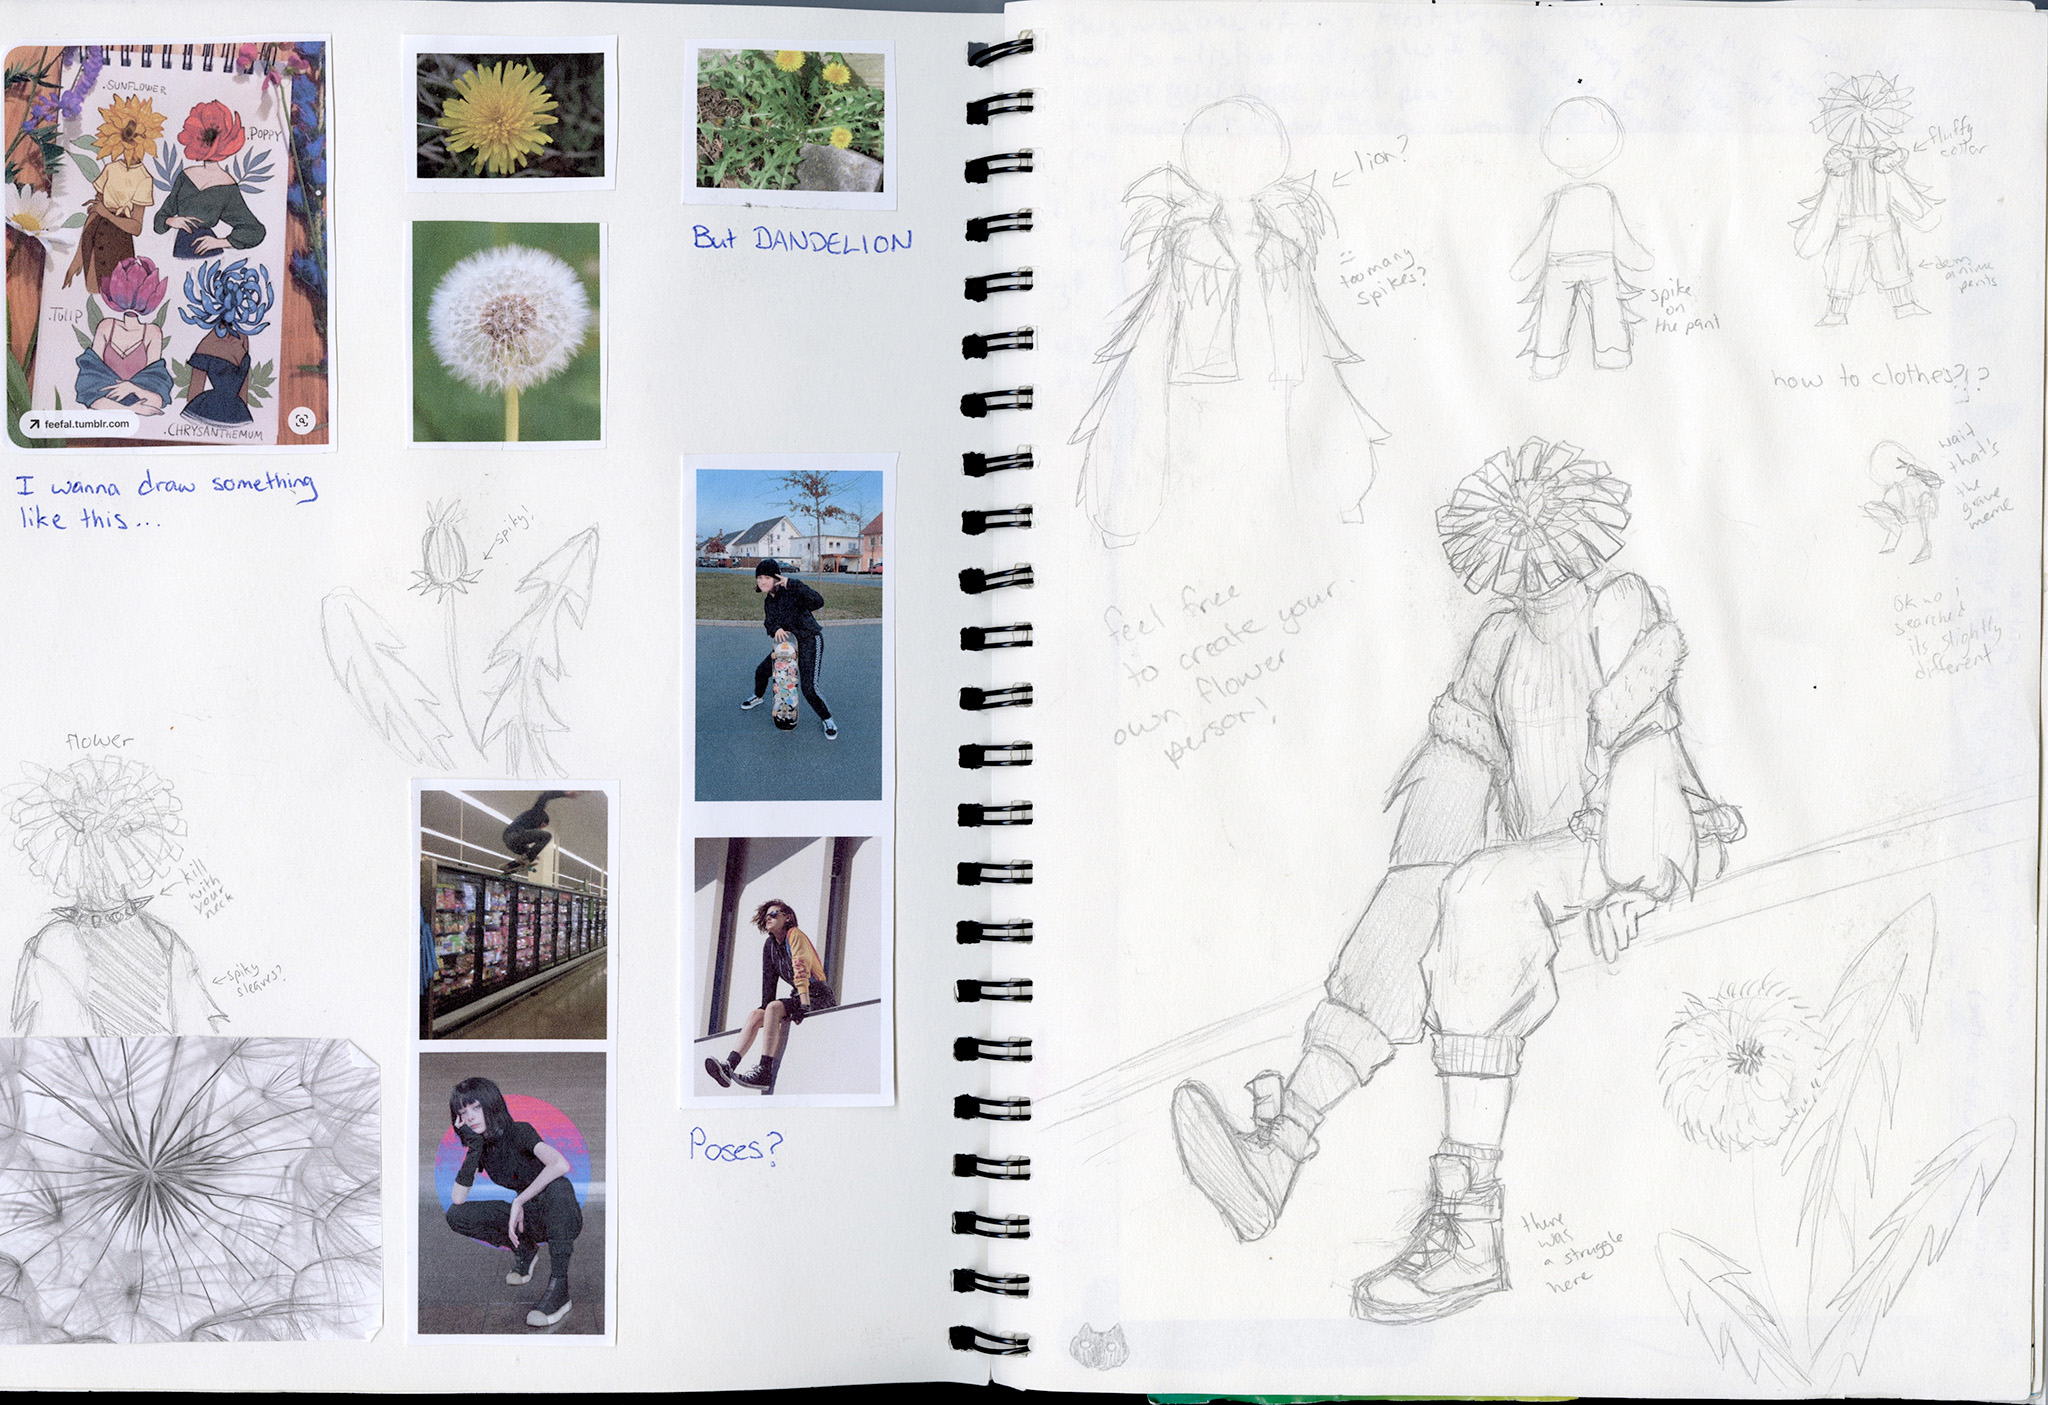 Sketch of the dandelion person with some reference images